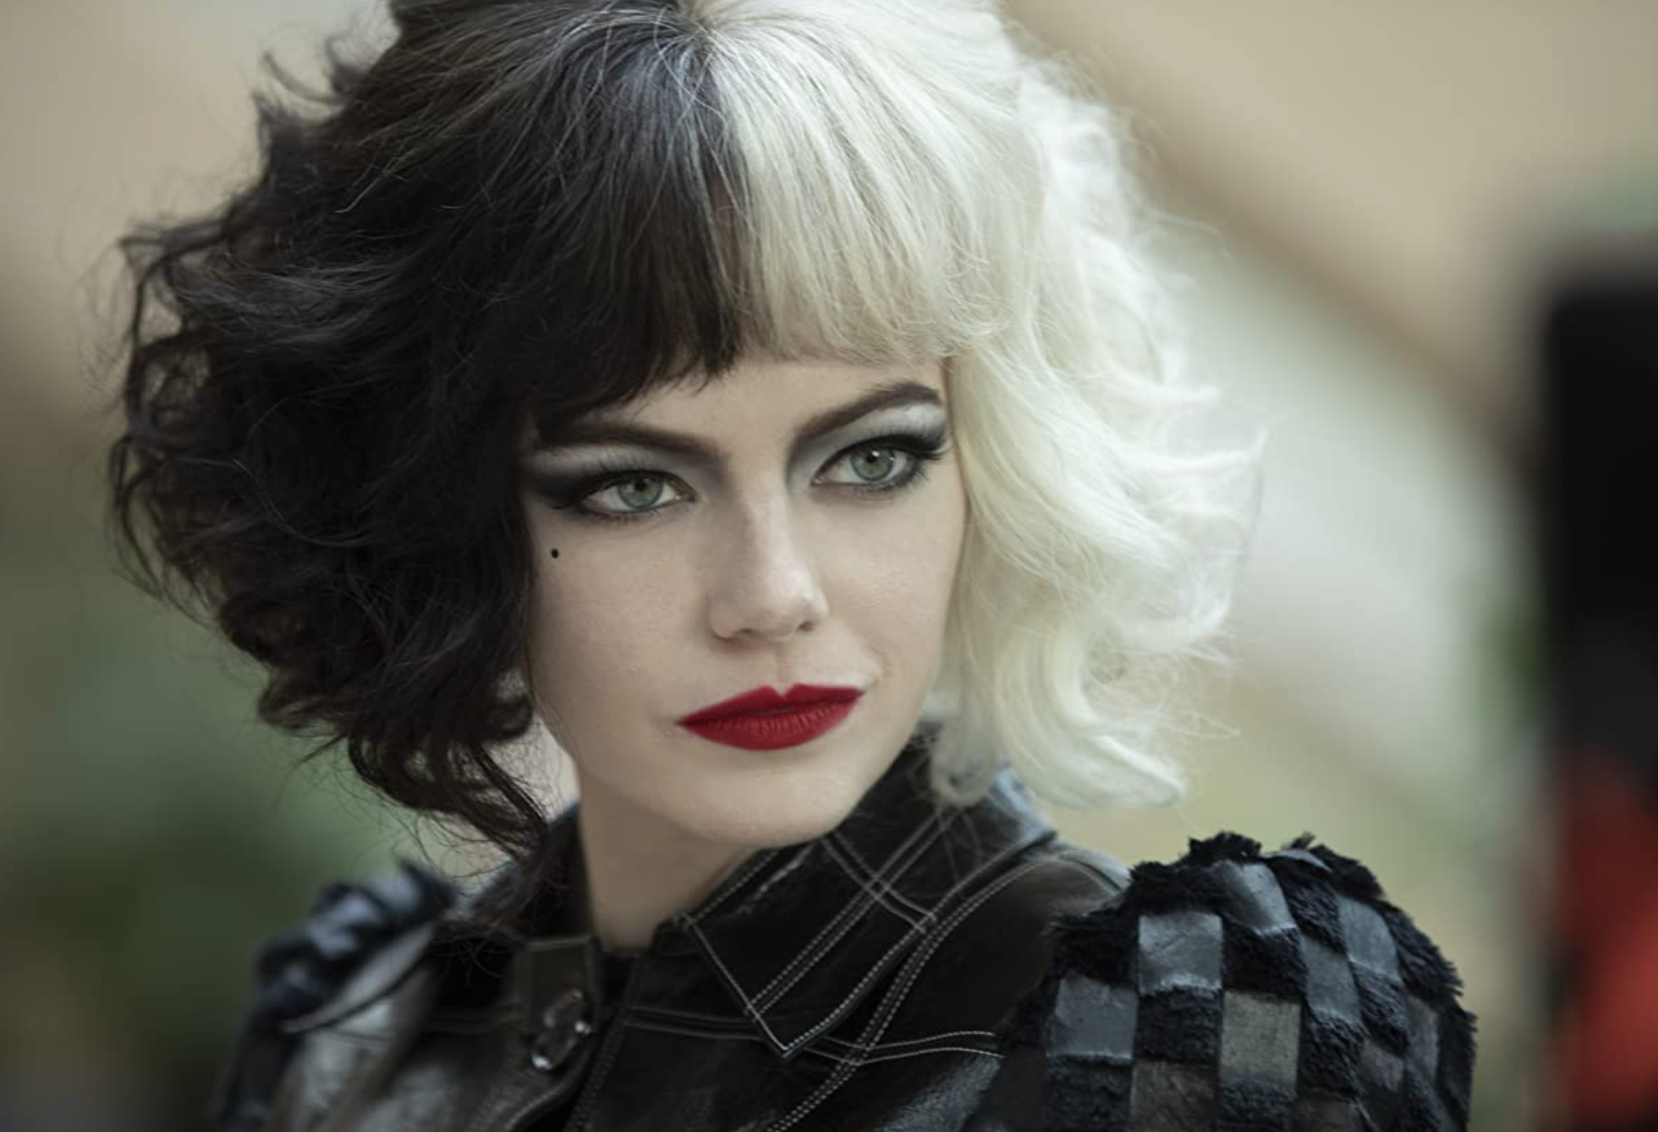 Emma Stone Attends 'Cruella' Premiere After Welcoming a Baby Girl